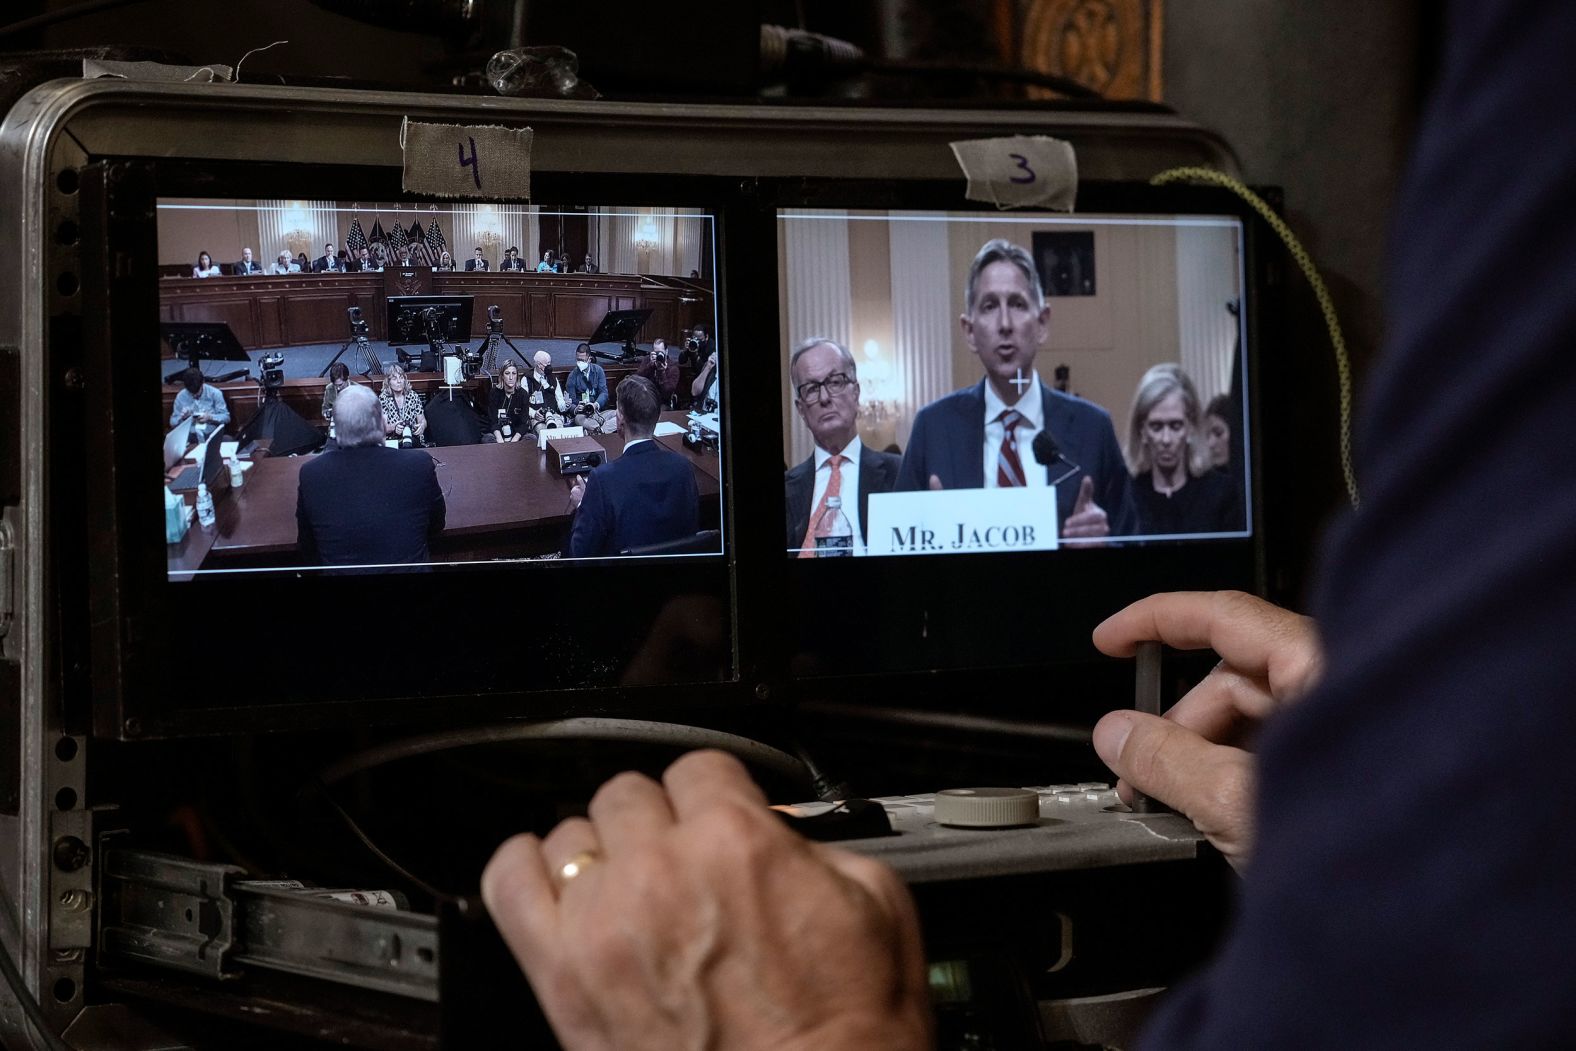 Testimony from Greg Jacob, former counsel to Pence, is seen on a screen as he speaks on June 16. <a href="index.php?page=&url=https%3A%2F%2Fwww.cnn.com%2Fpolitics%2Flive-news%2Fjanuary-6-hearings-june-16%2Fh_322fb3374952511929590b31b79edbd0" target="_blank">Jacob told the committee</a> that Pence's legal team reviewed every election in American history as they examined whether a sitting vice president had the authority to reject Electoral College votes. "No vice president in 230 years of history had ever claimed to have that kind of authority," Jacob said.